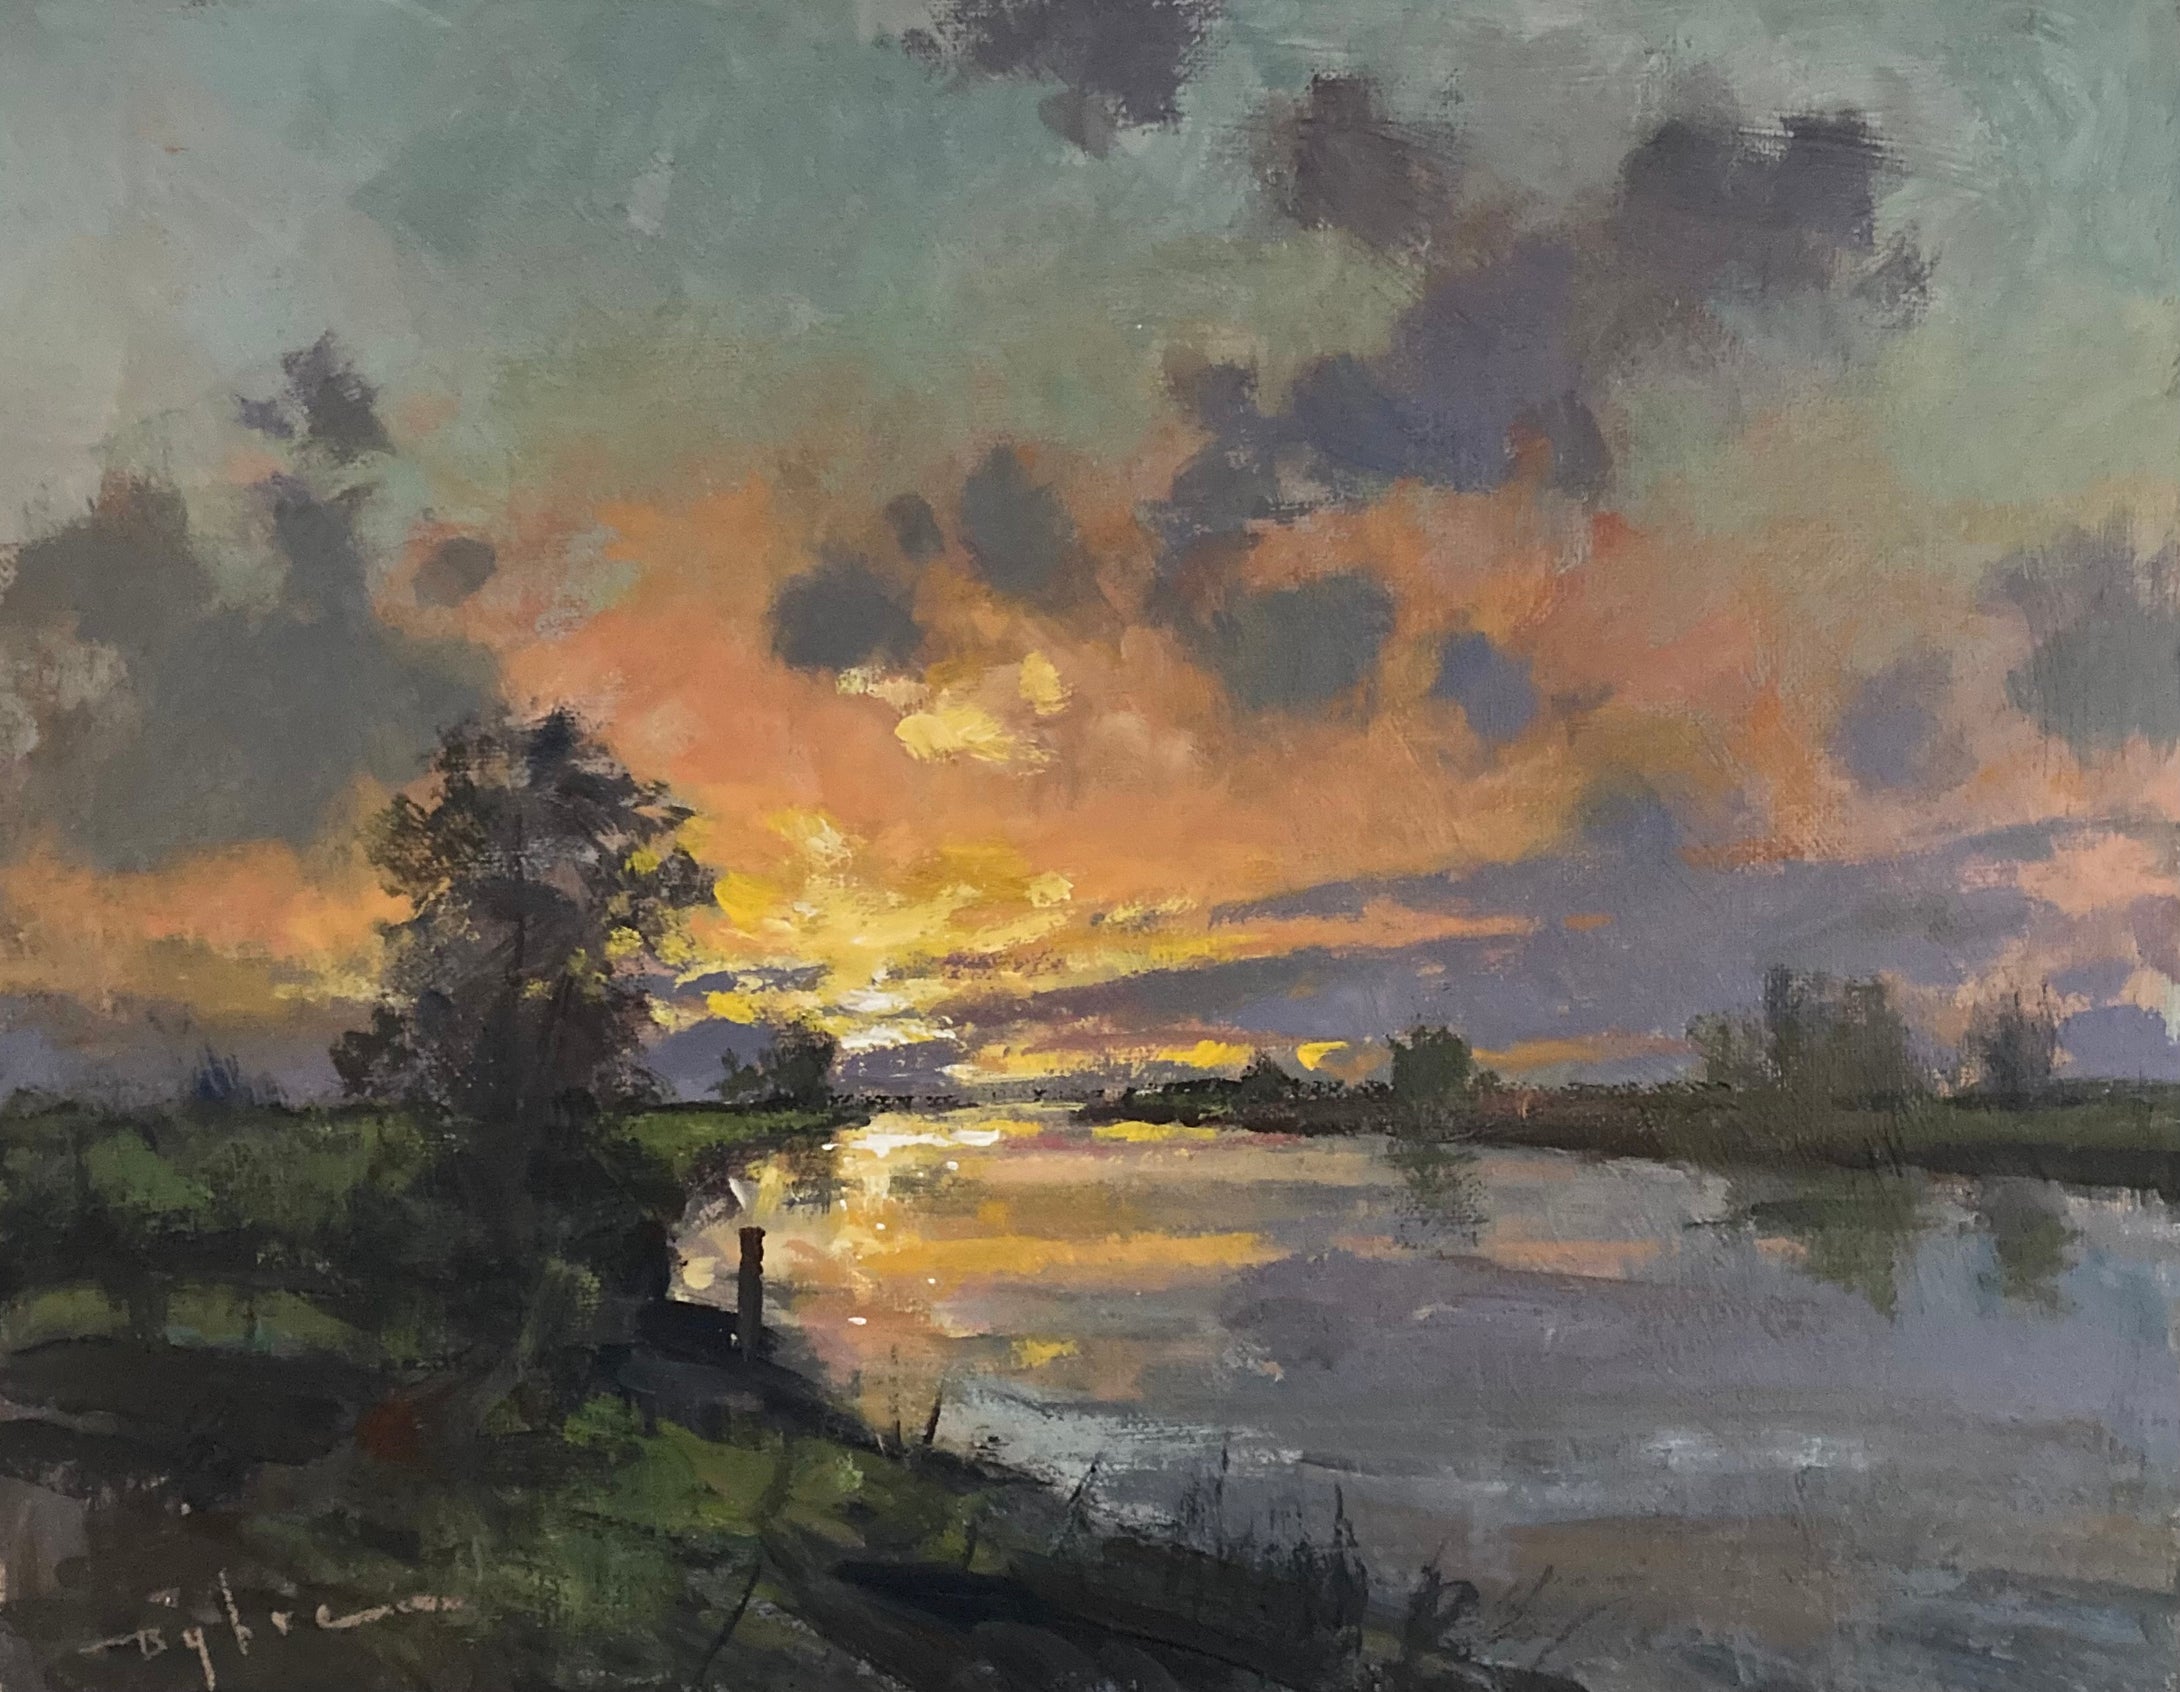 ‘Setting Sun on the River’